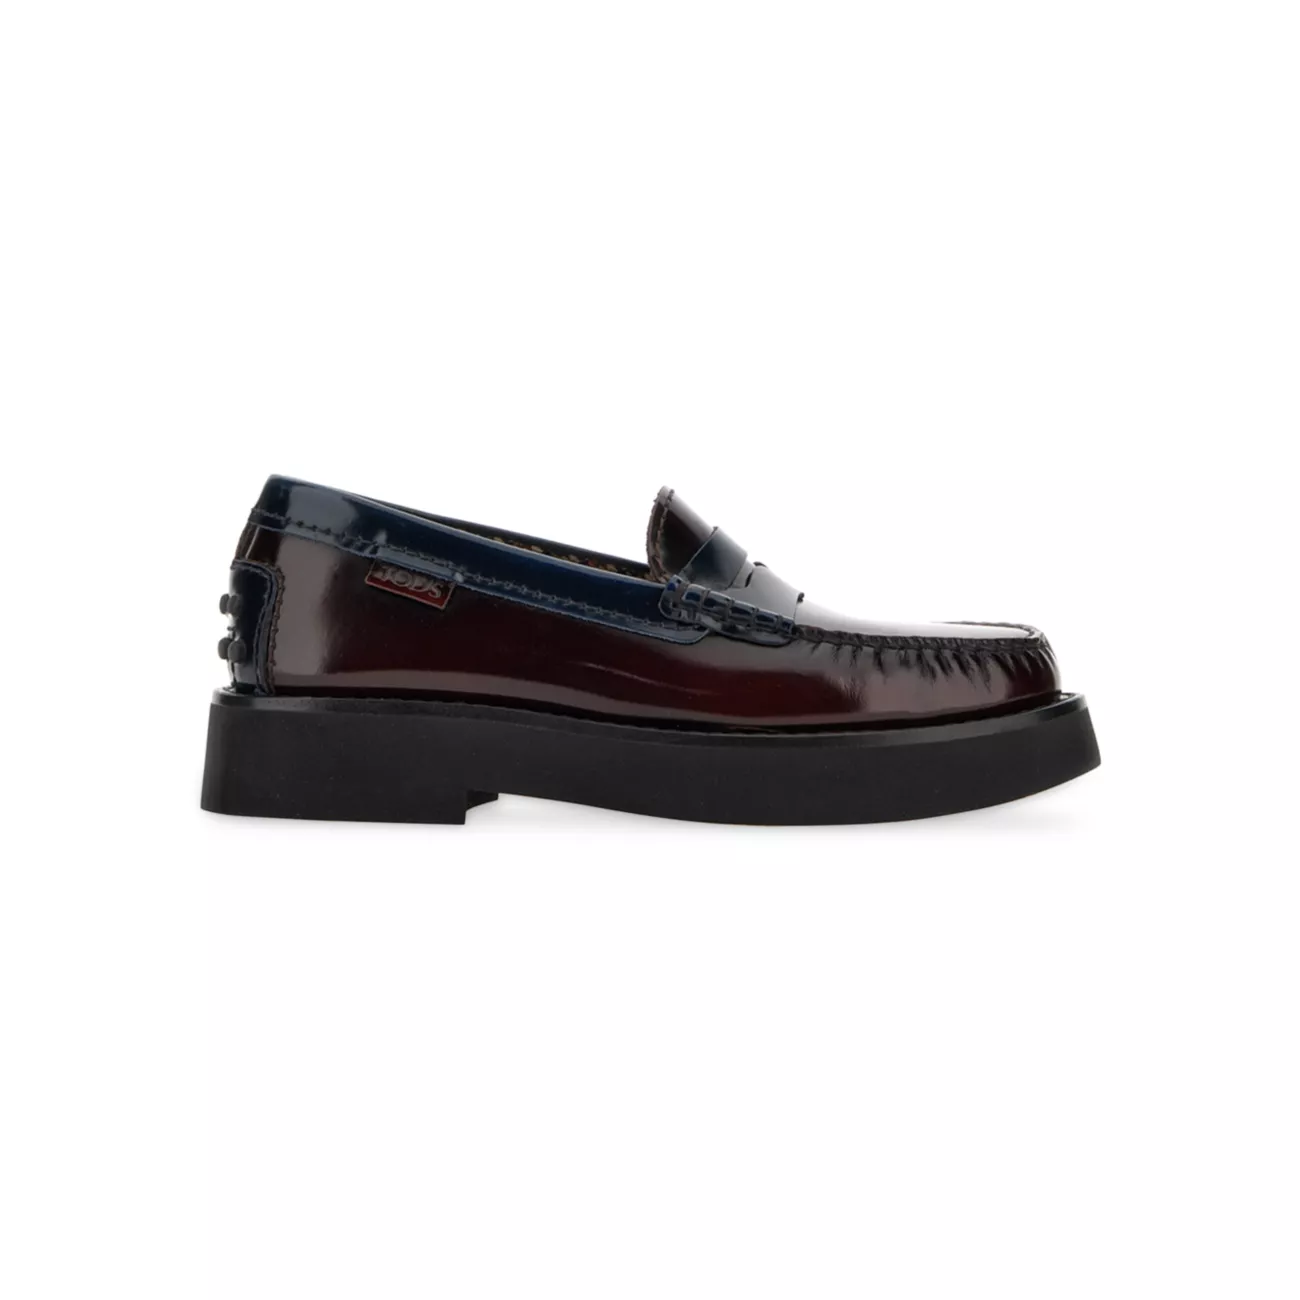 Colorblocked Patent Leather Loafers Tod's